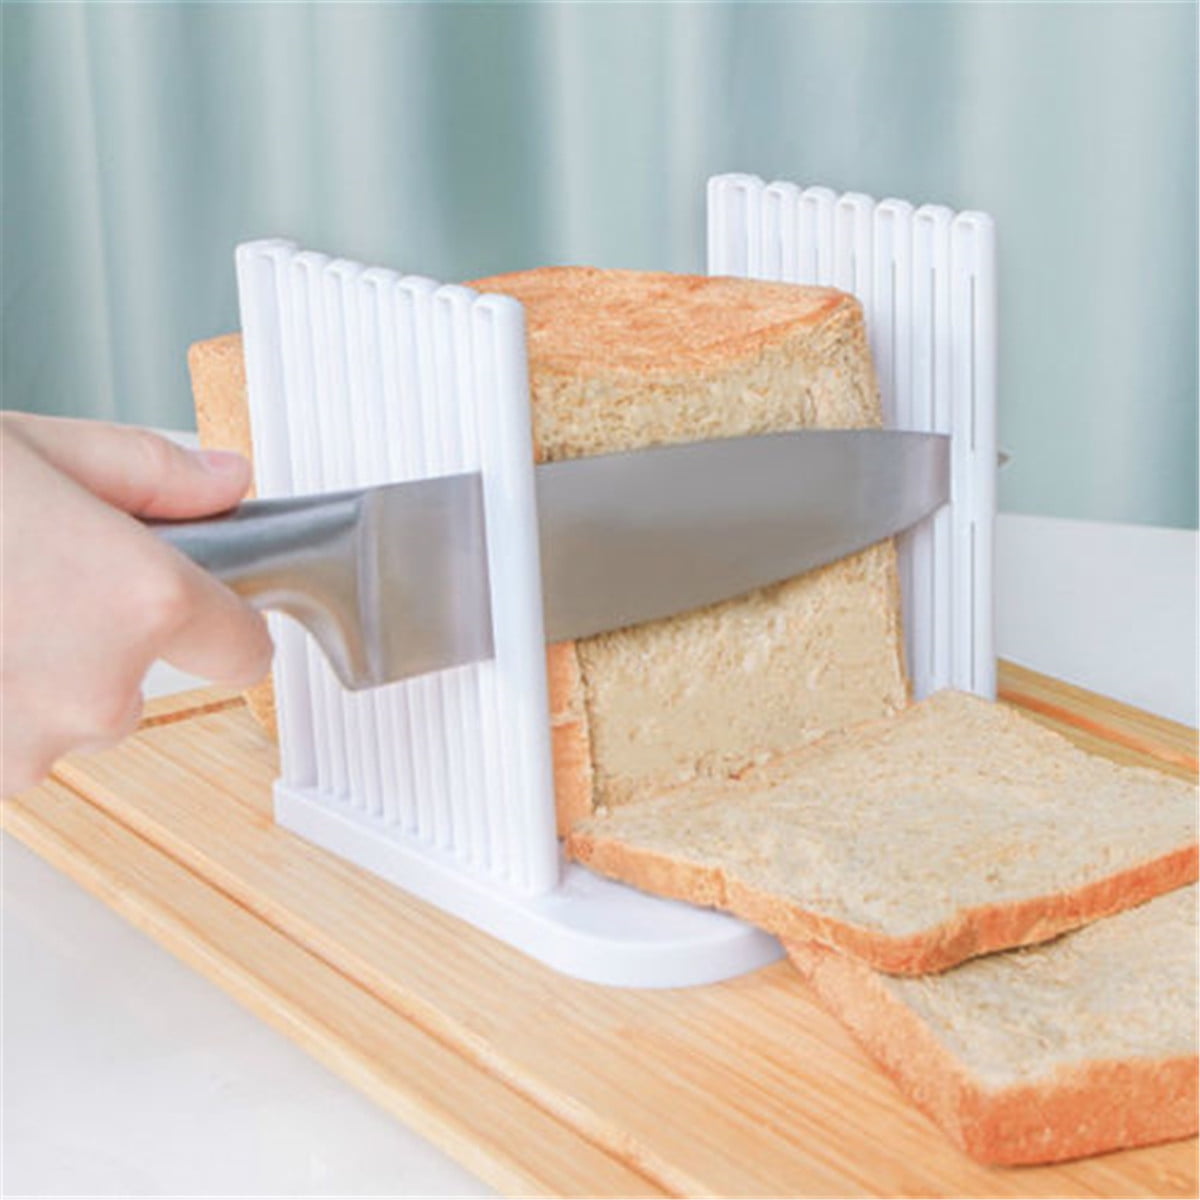 Toorise Bread Slicer Foldable Toast Slicer Tool Adjustable Toast Loaf Slicing Machine Plastic Bread Cutting Guide Tools for Homemade Bread Kitchen